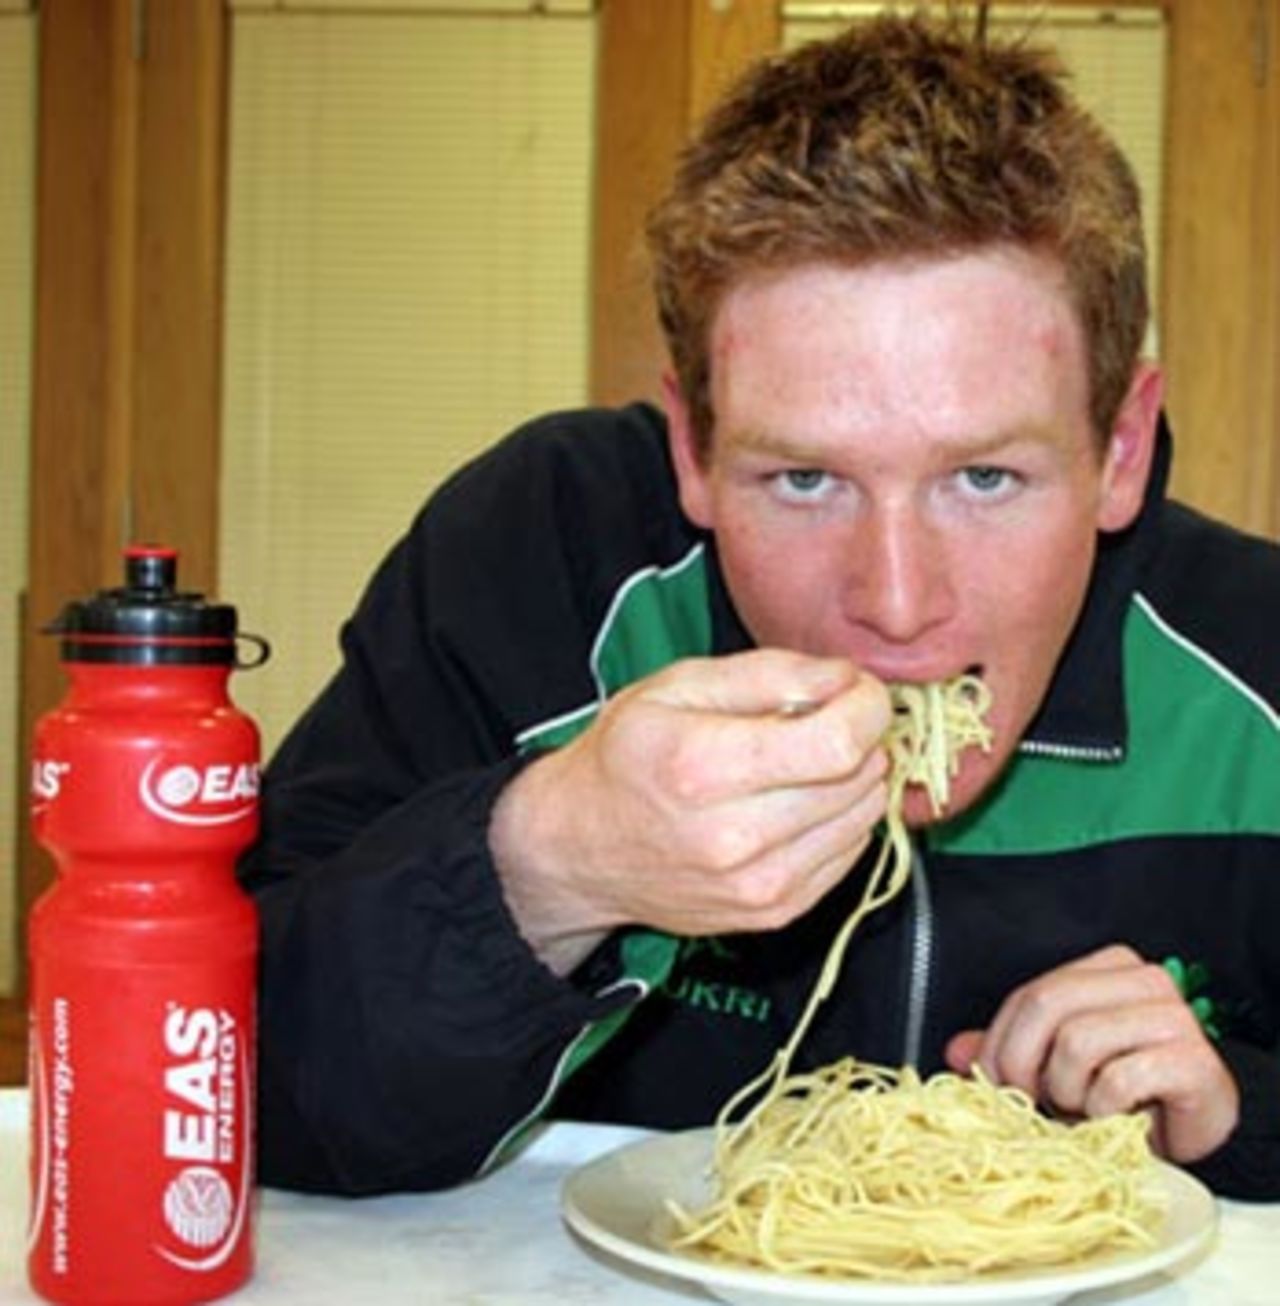 Eoin Morgan tucks into some healthy food on the launch of Ireland's fitness drive, May 26, 2006